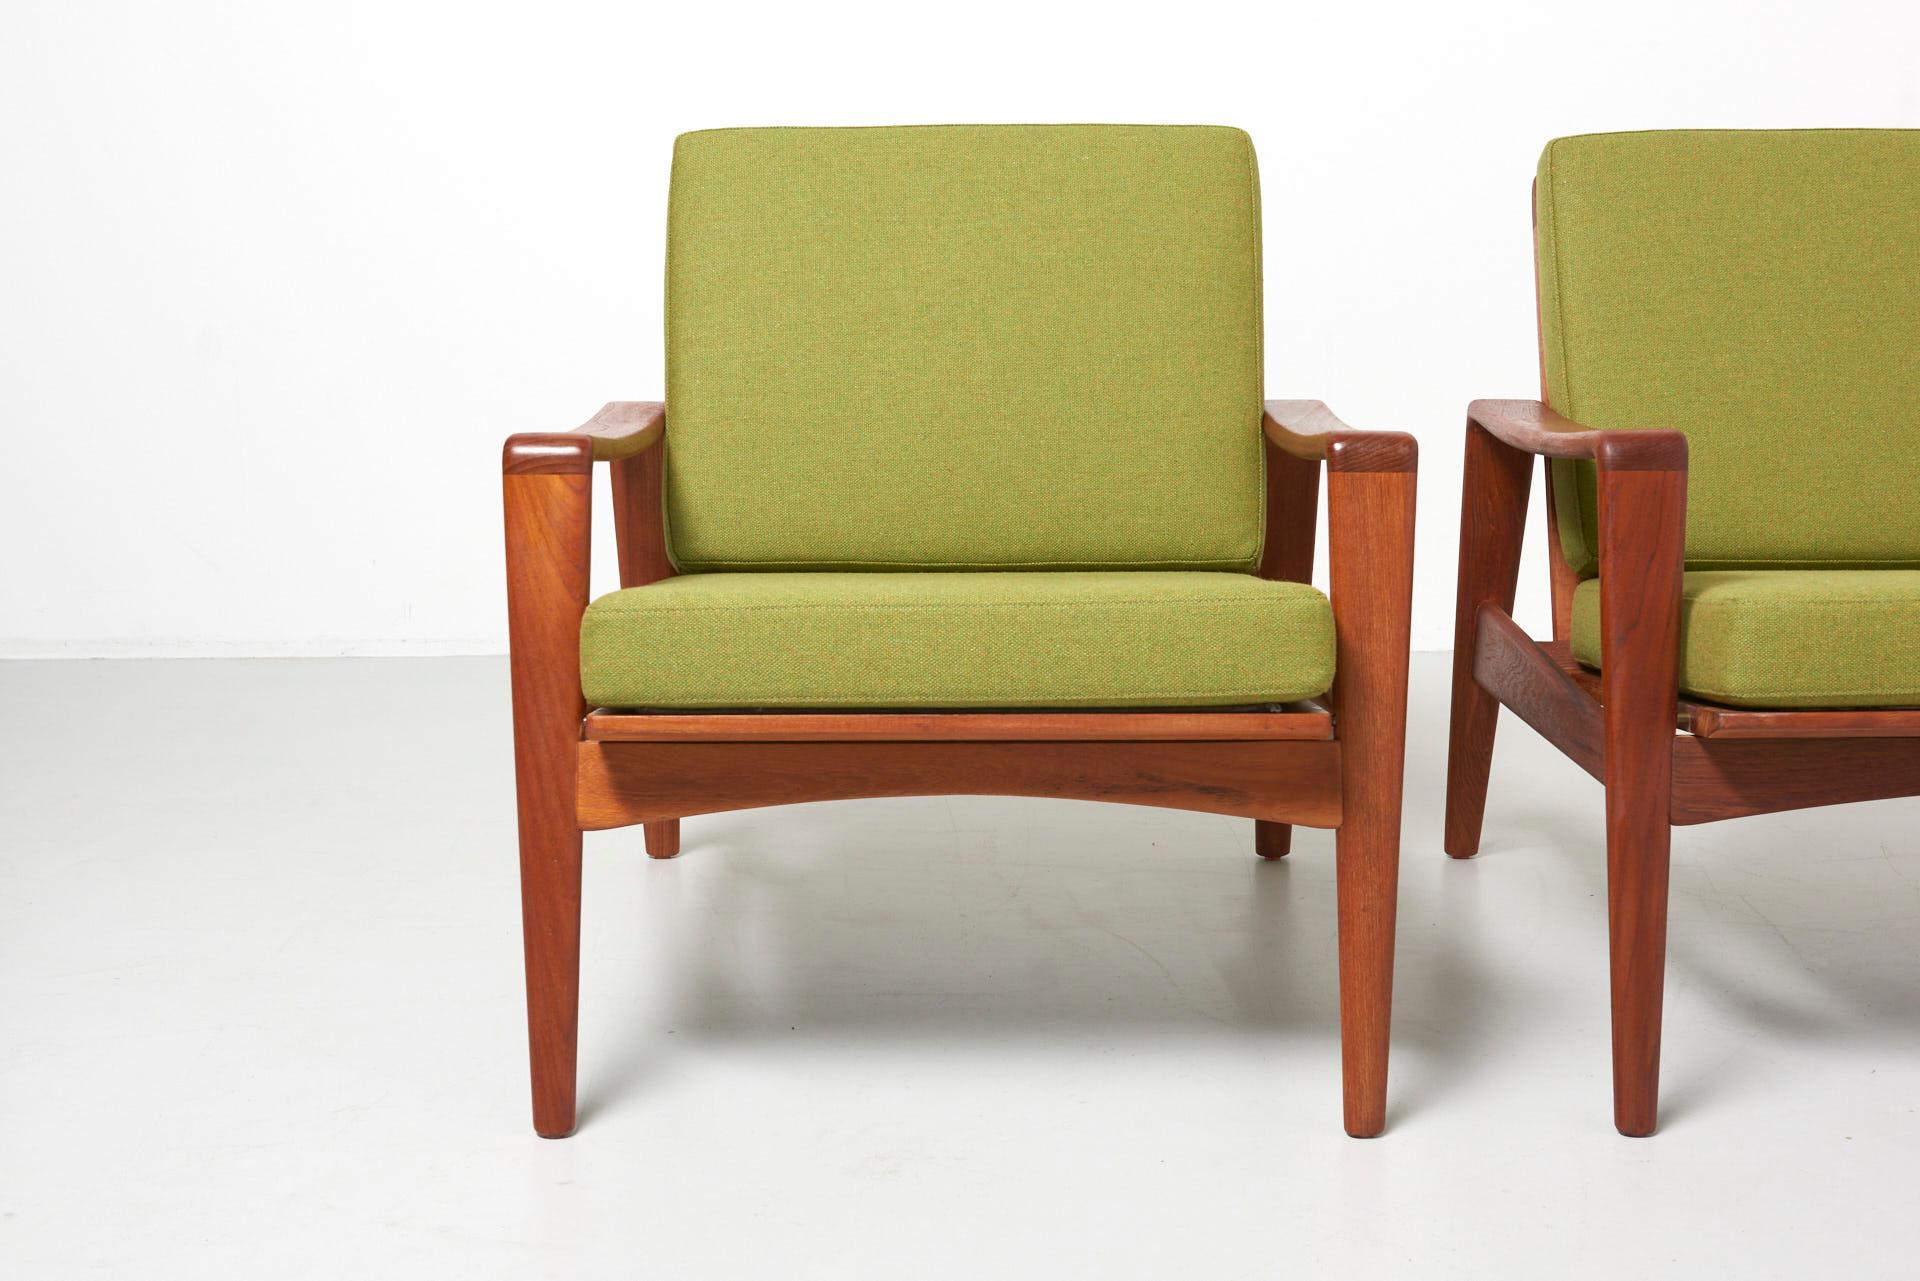 A pair easy chairs in teak with new cushions green wool fabric.
Design by Arne Wahl Iversen in the 1960s. Made in Denmark by Komfort.

 